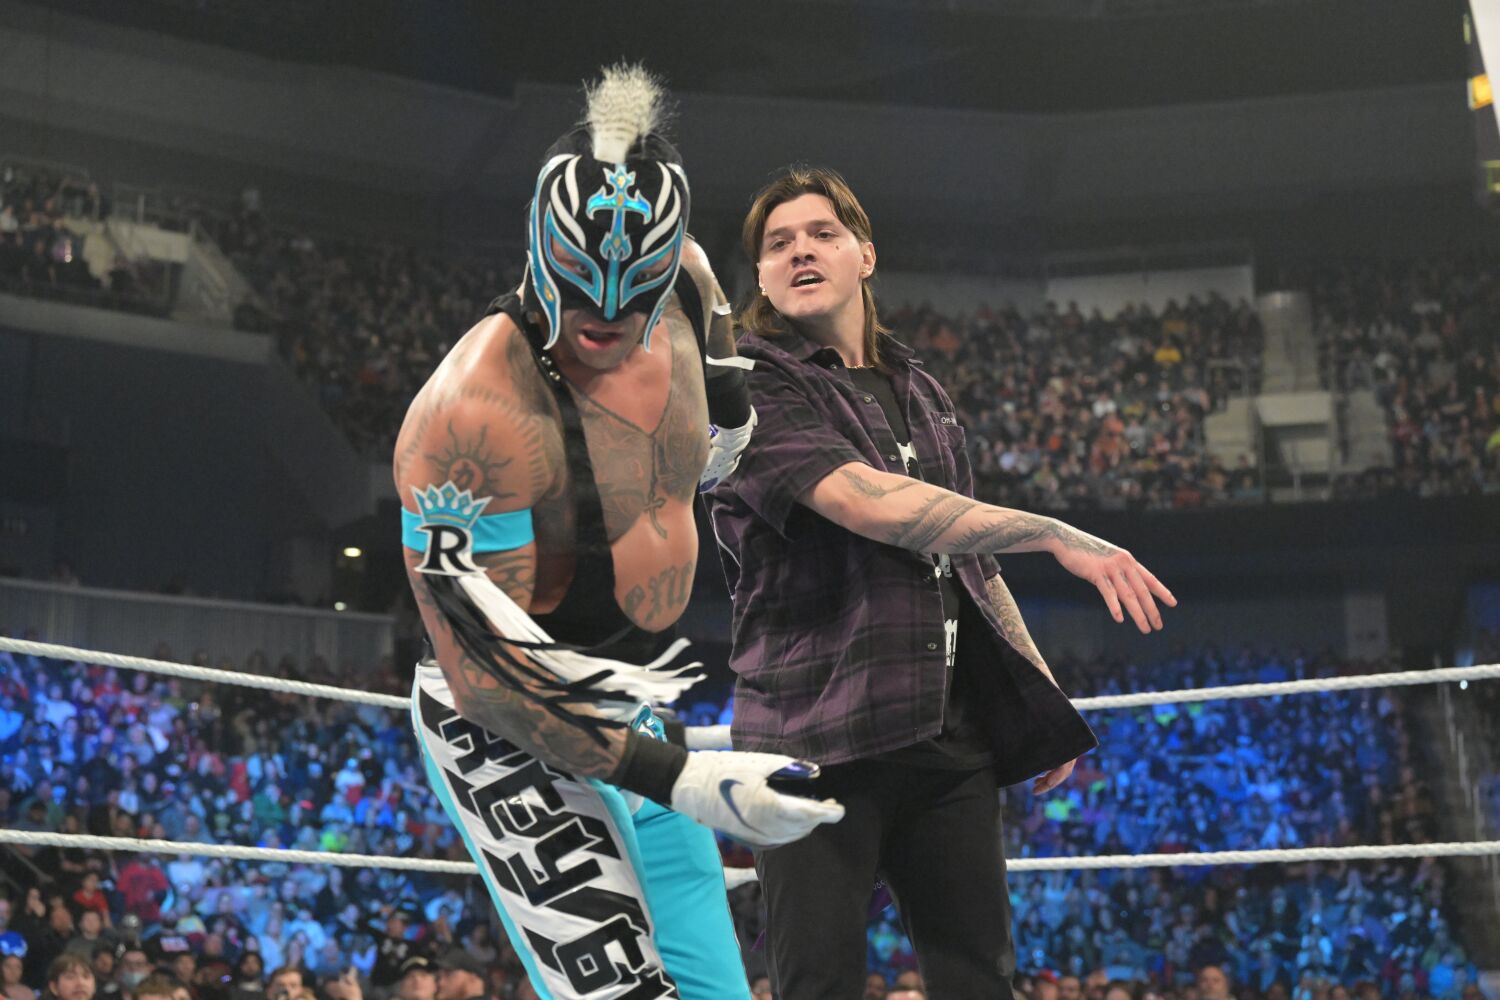 A look beneath the mask of Rey Mysterio before his Hall of Fame induction